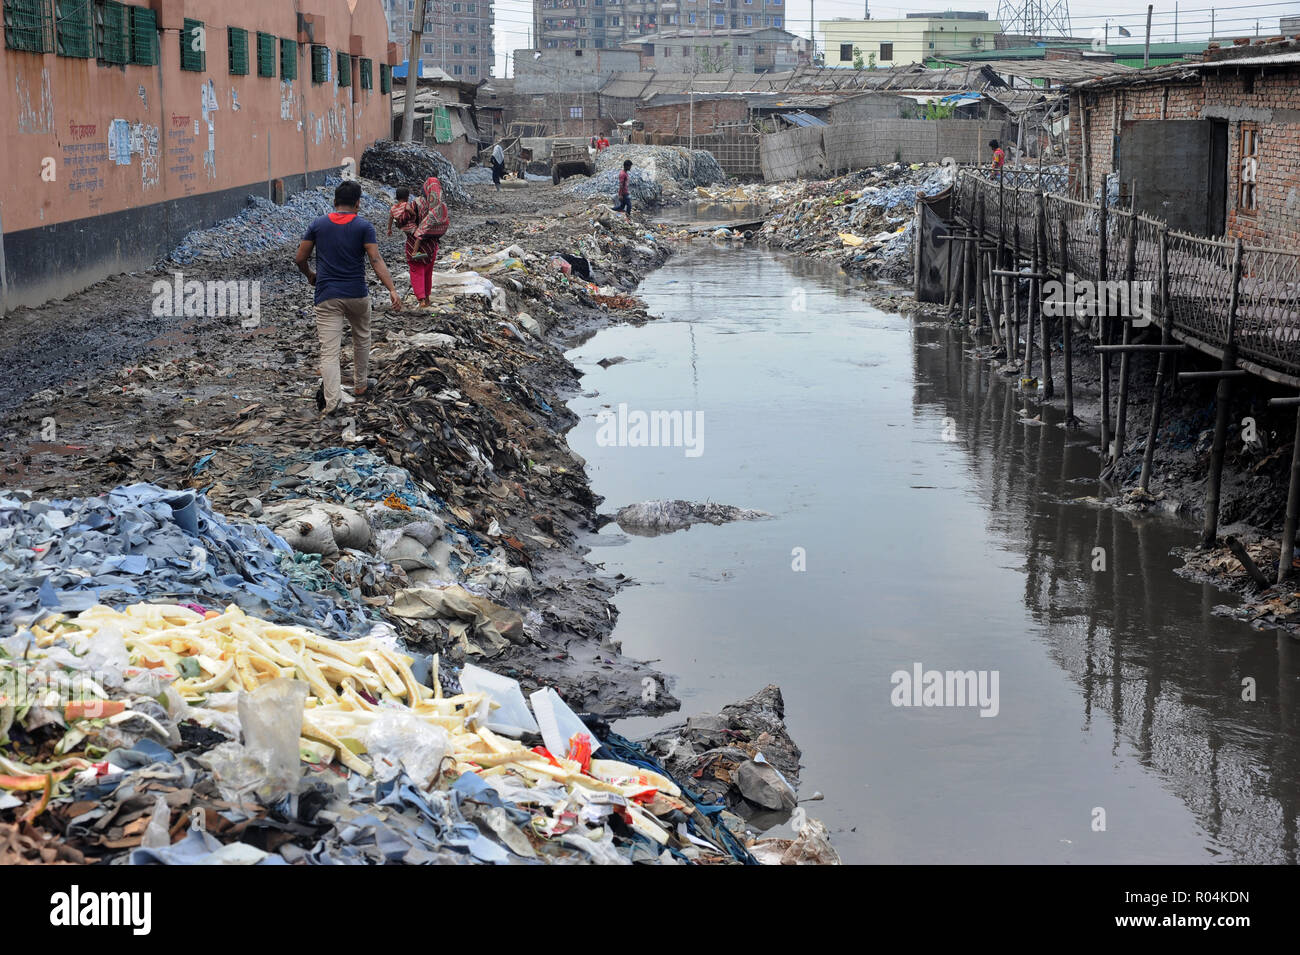 Dhaka, Bangladesh - April 04, 2016: Wastage toxic lather materials dumped in an open canal at the Hazaribagh tannery area in Dhaka, Bangladesh. Stock Photo